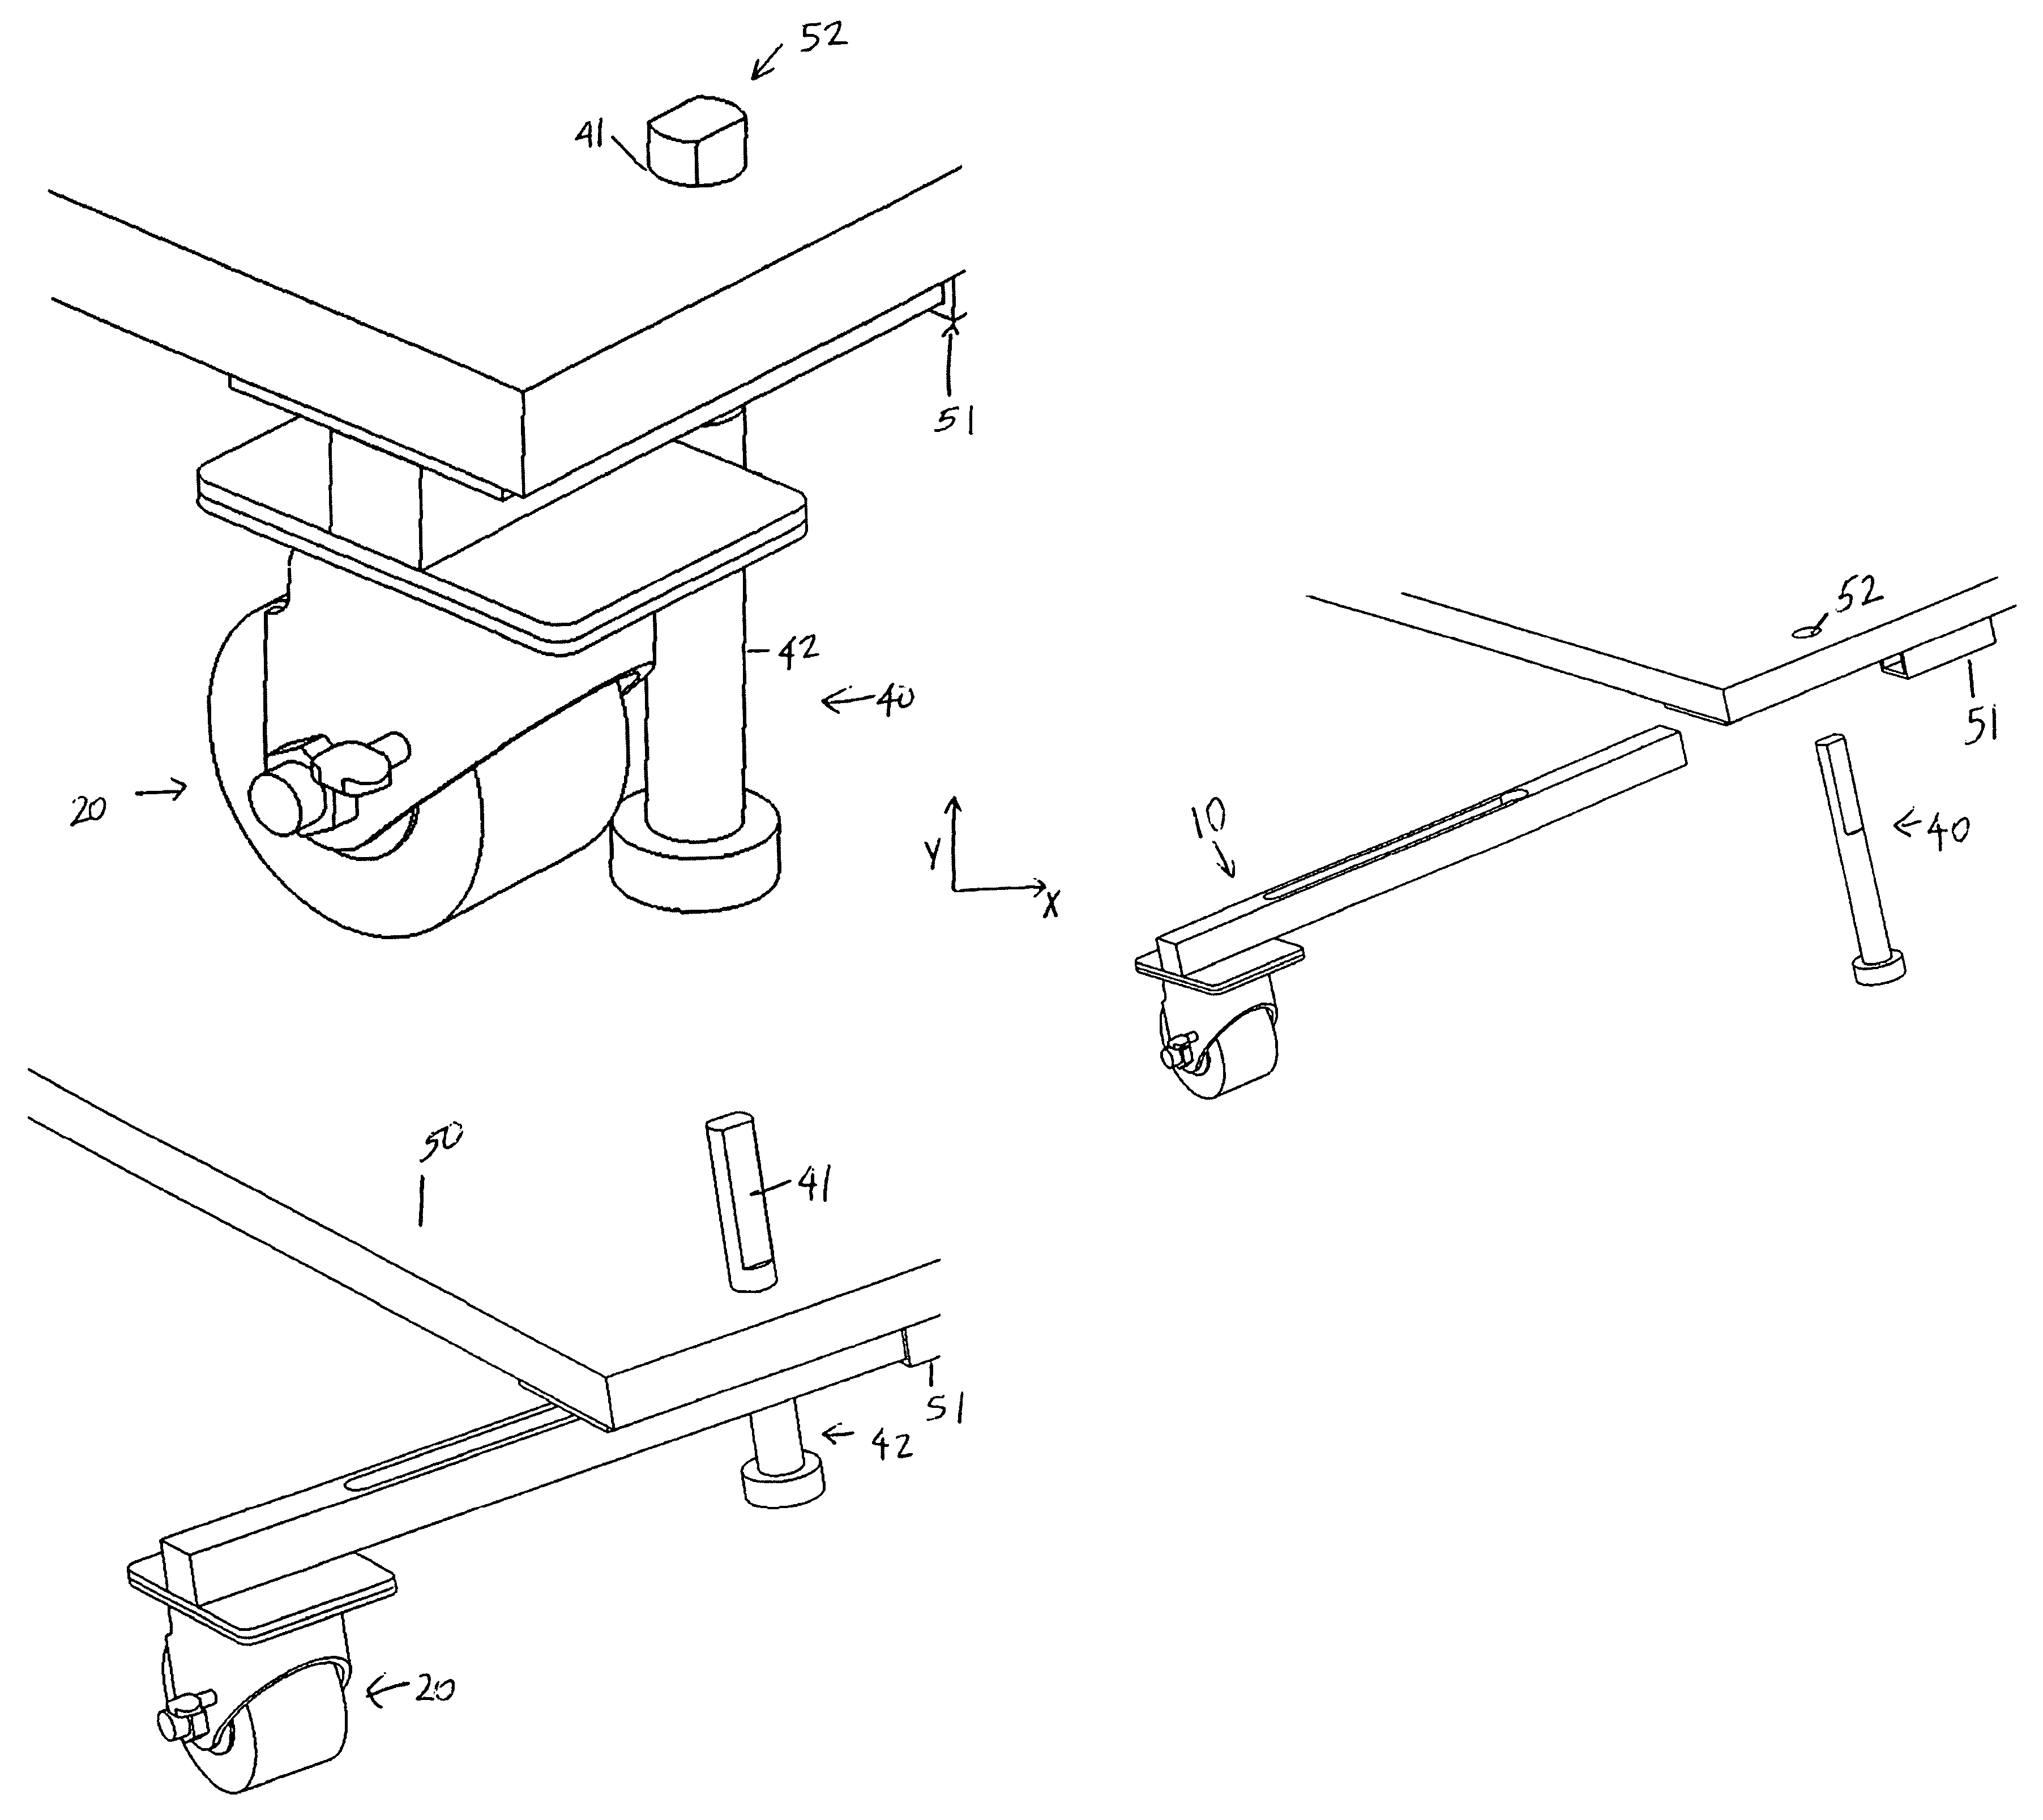 Forced extension caster assembly